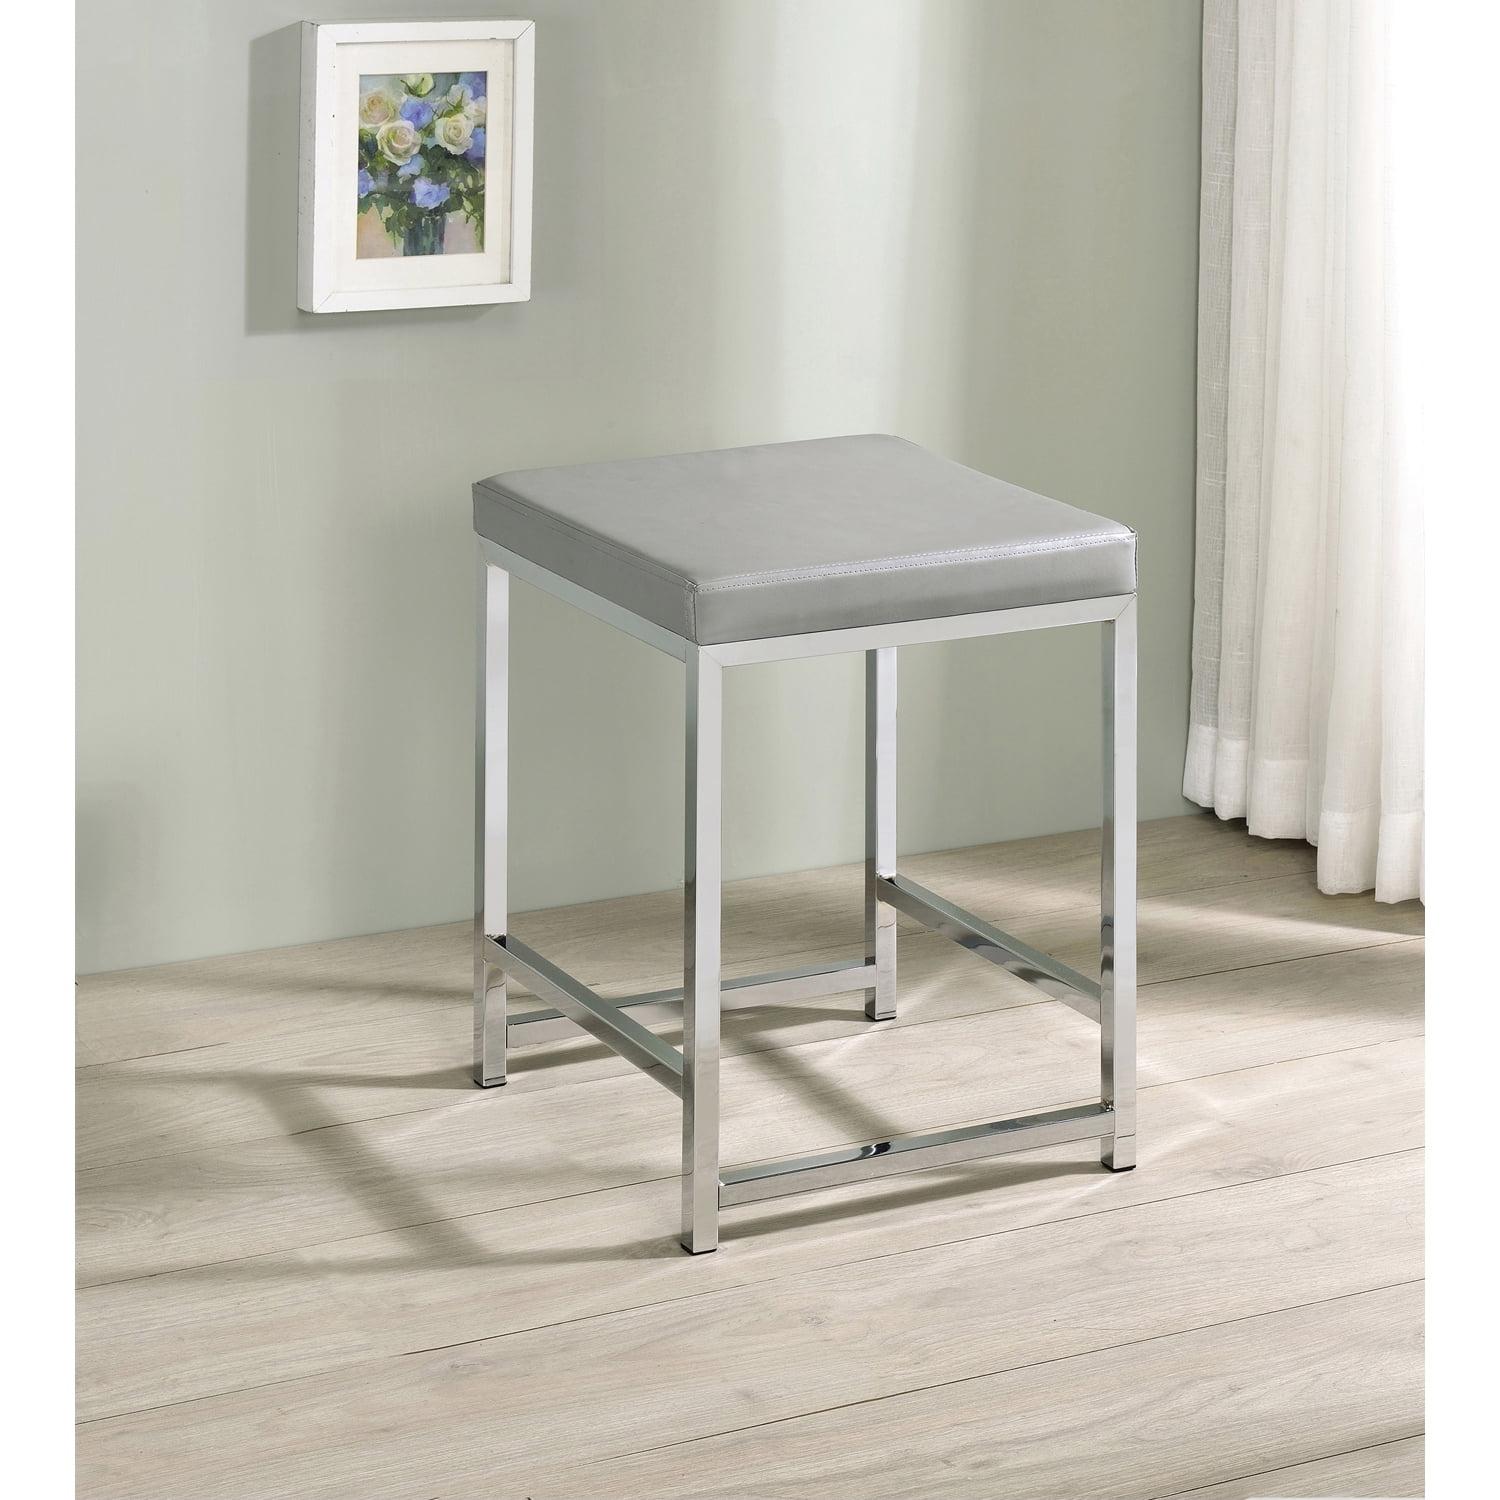 Contemporary Modern Light Grey Leatherette Vanity Stool with Chrome Base